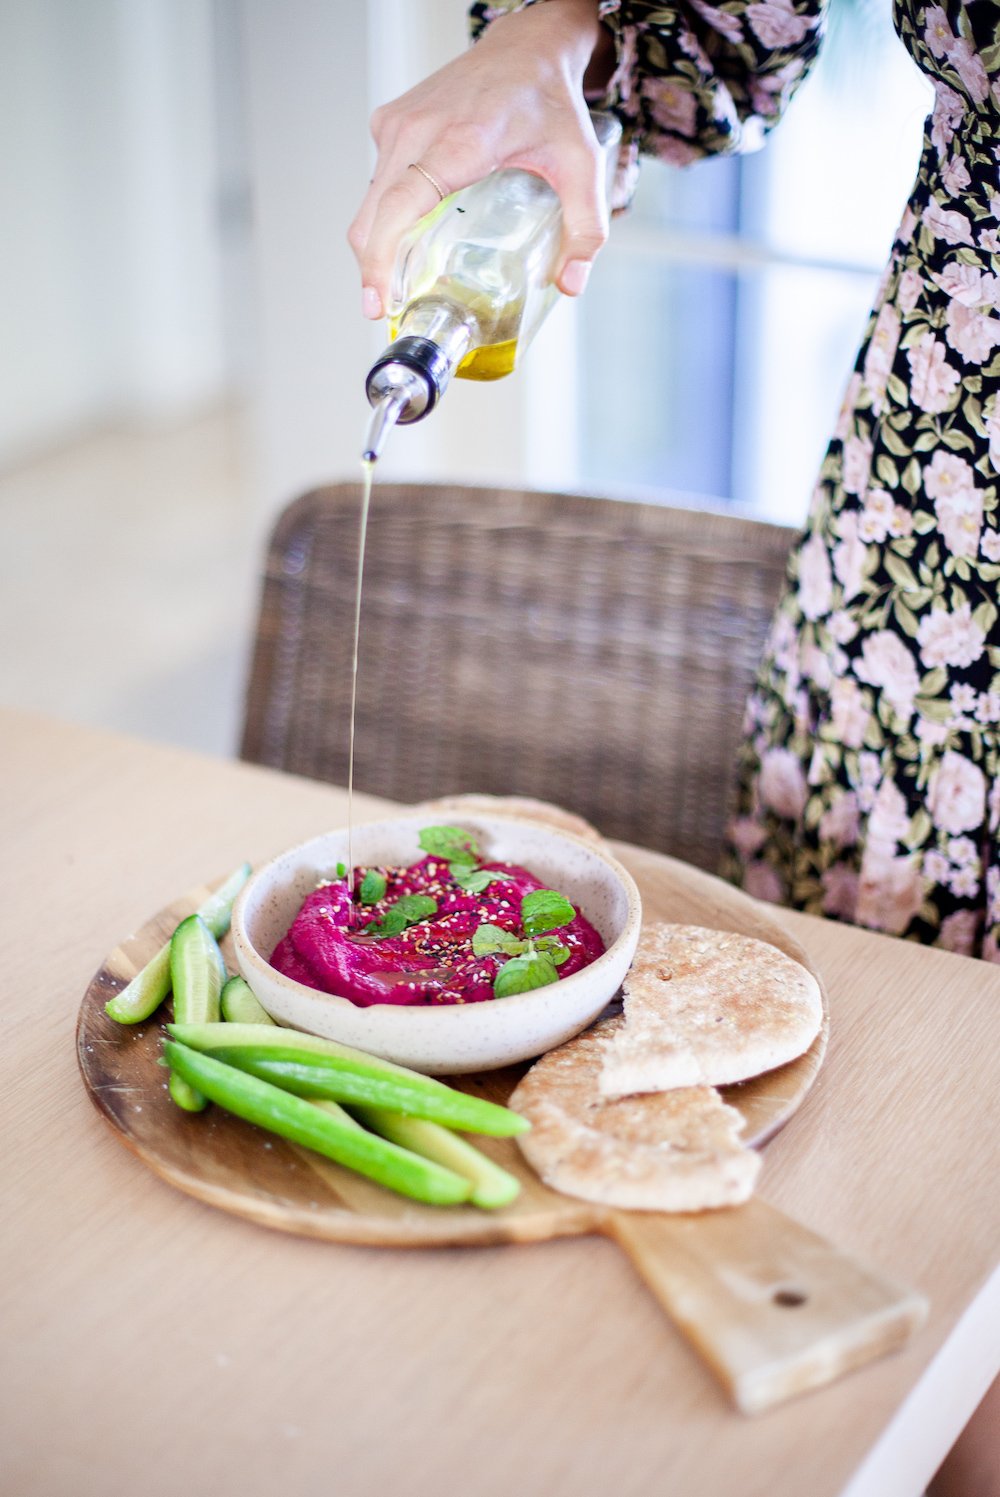 beet hummus recipe for a valentine's date night at home